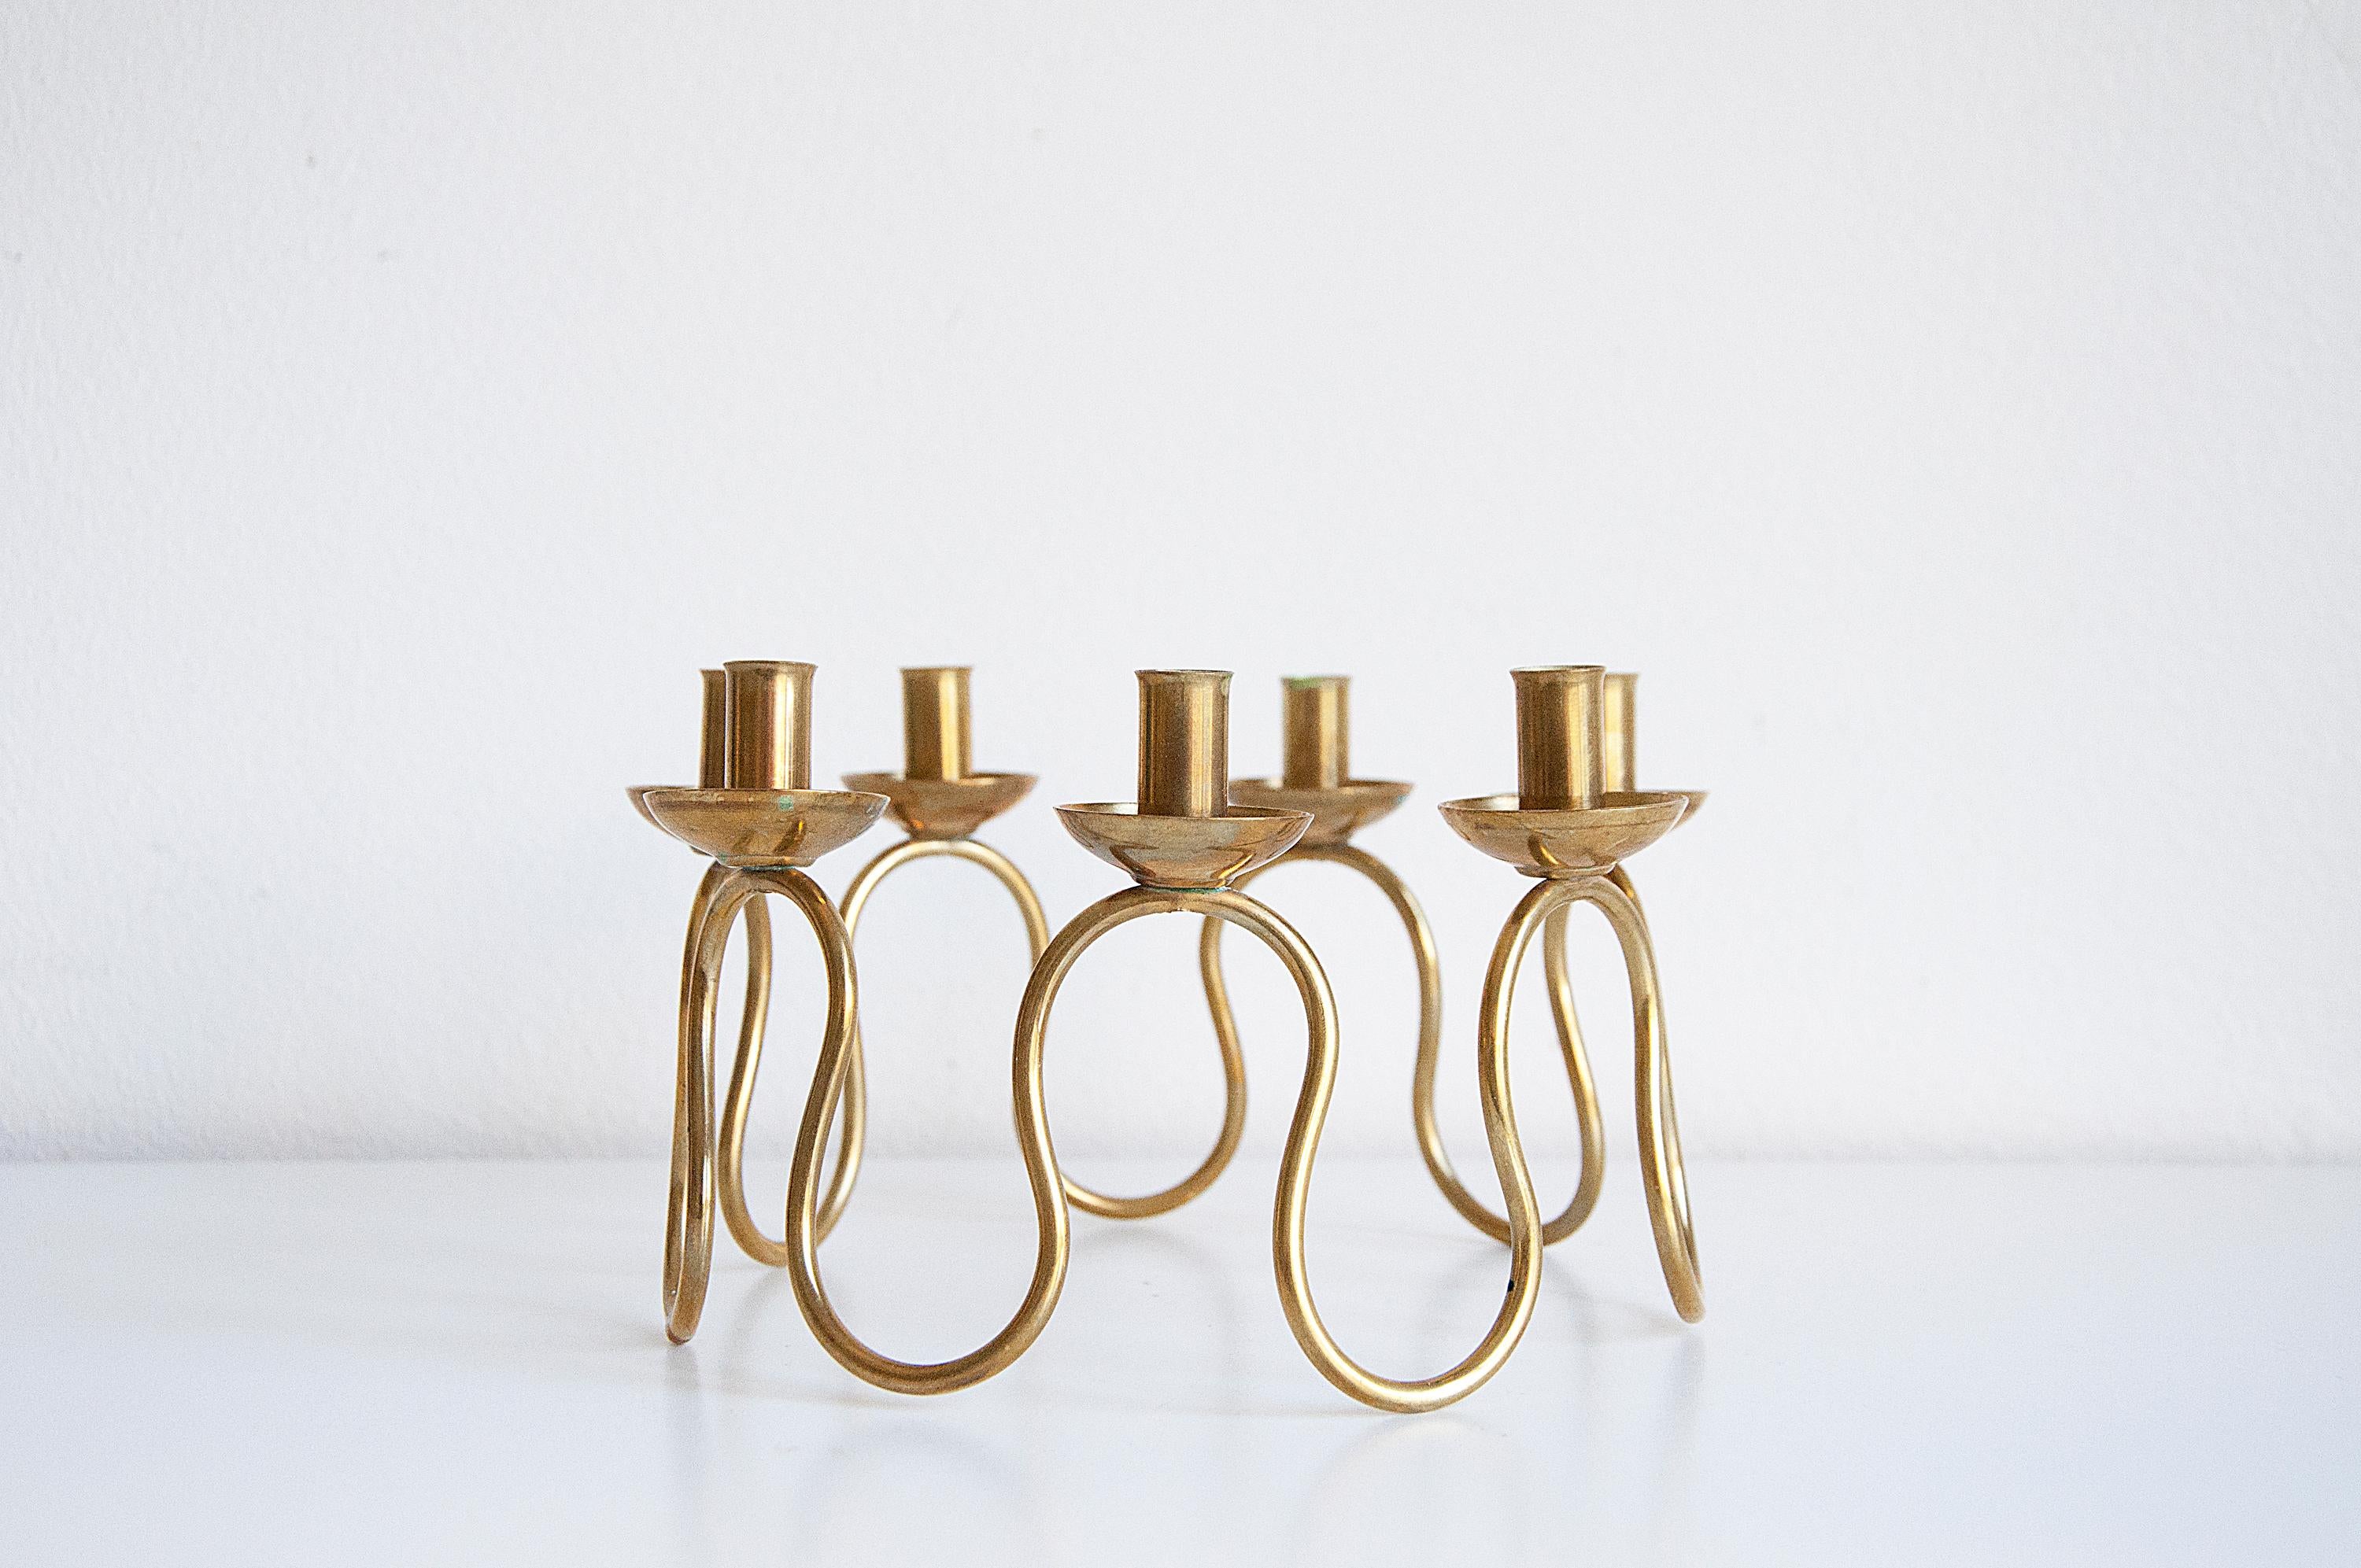 Beautiful swedish modern candleholder in brass by Lars Holmström, 1950s.
Good vintage condition, wear and patina consistent with age and use. 